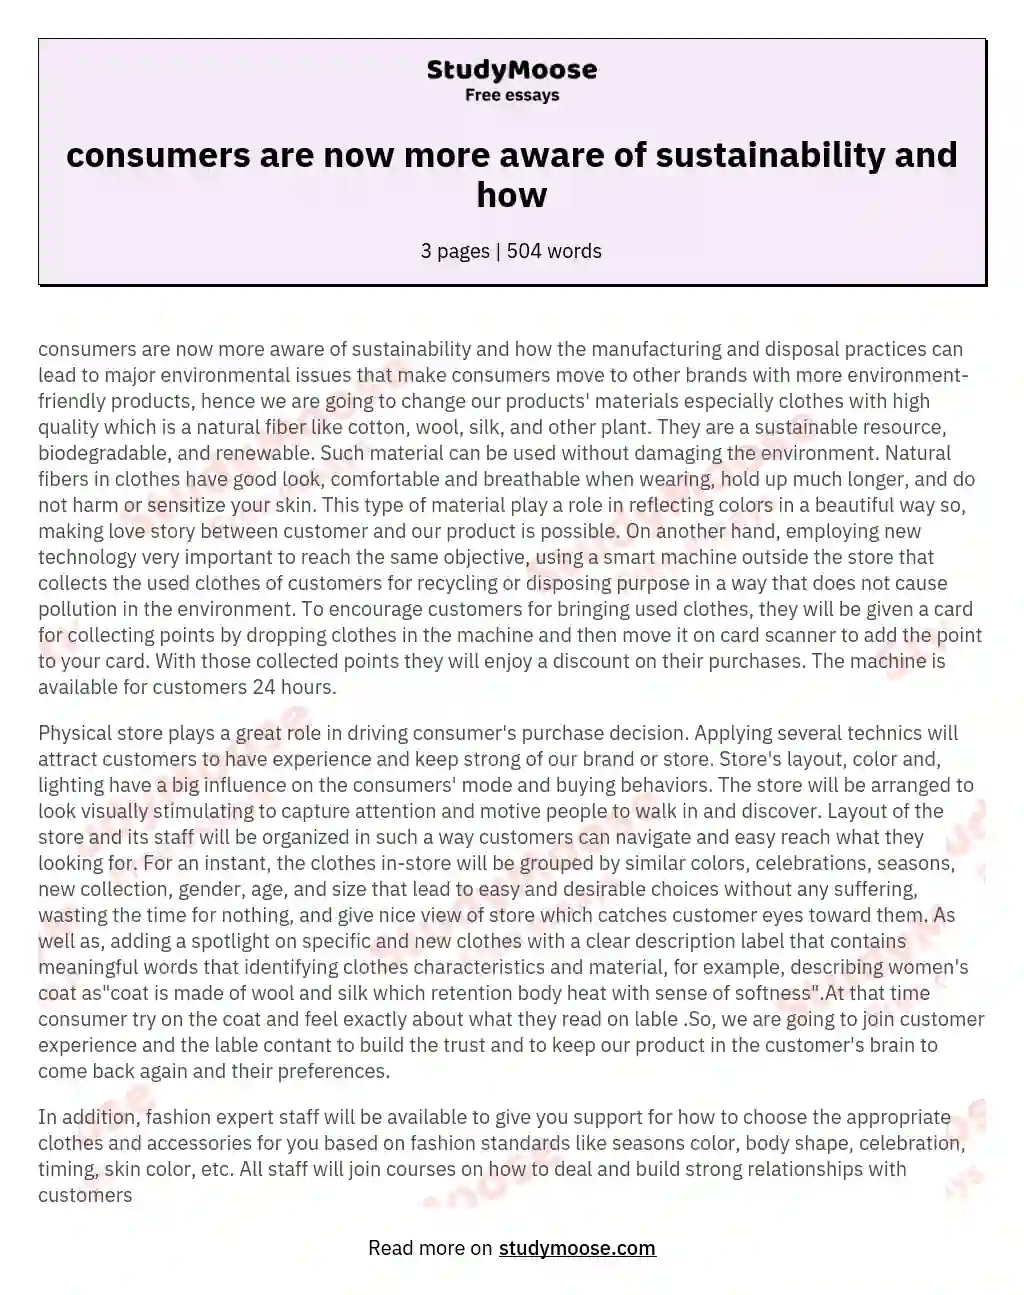 consumers are now more aware of sustainability and how essay